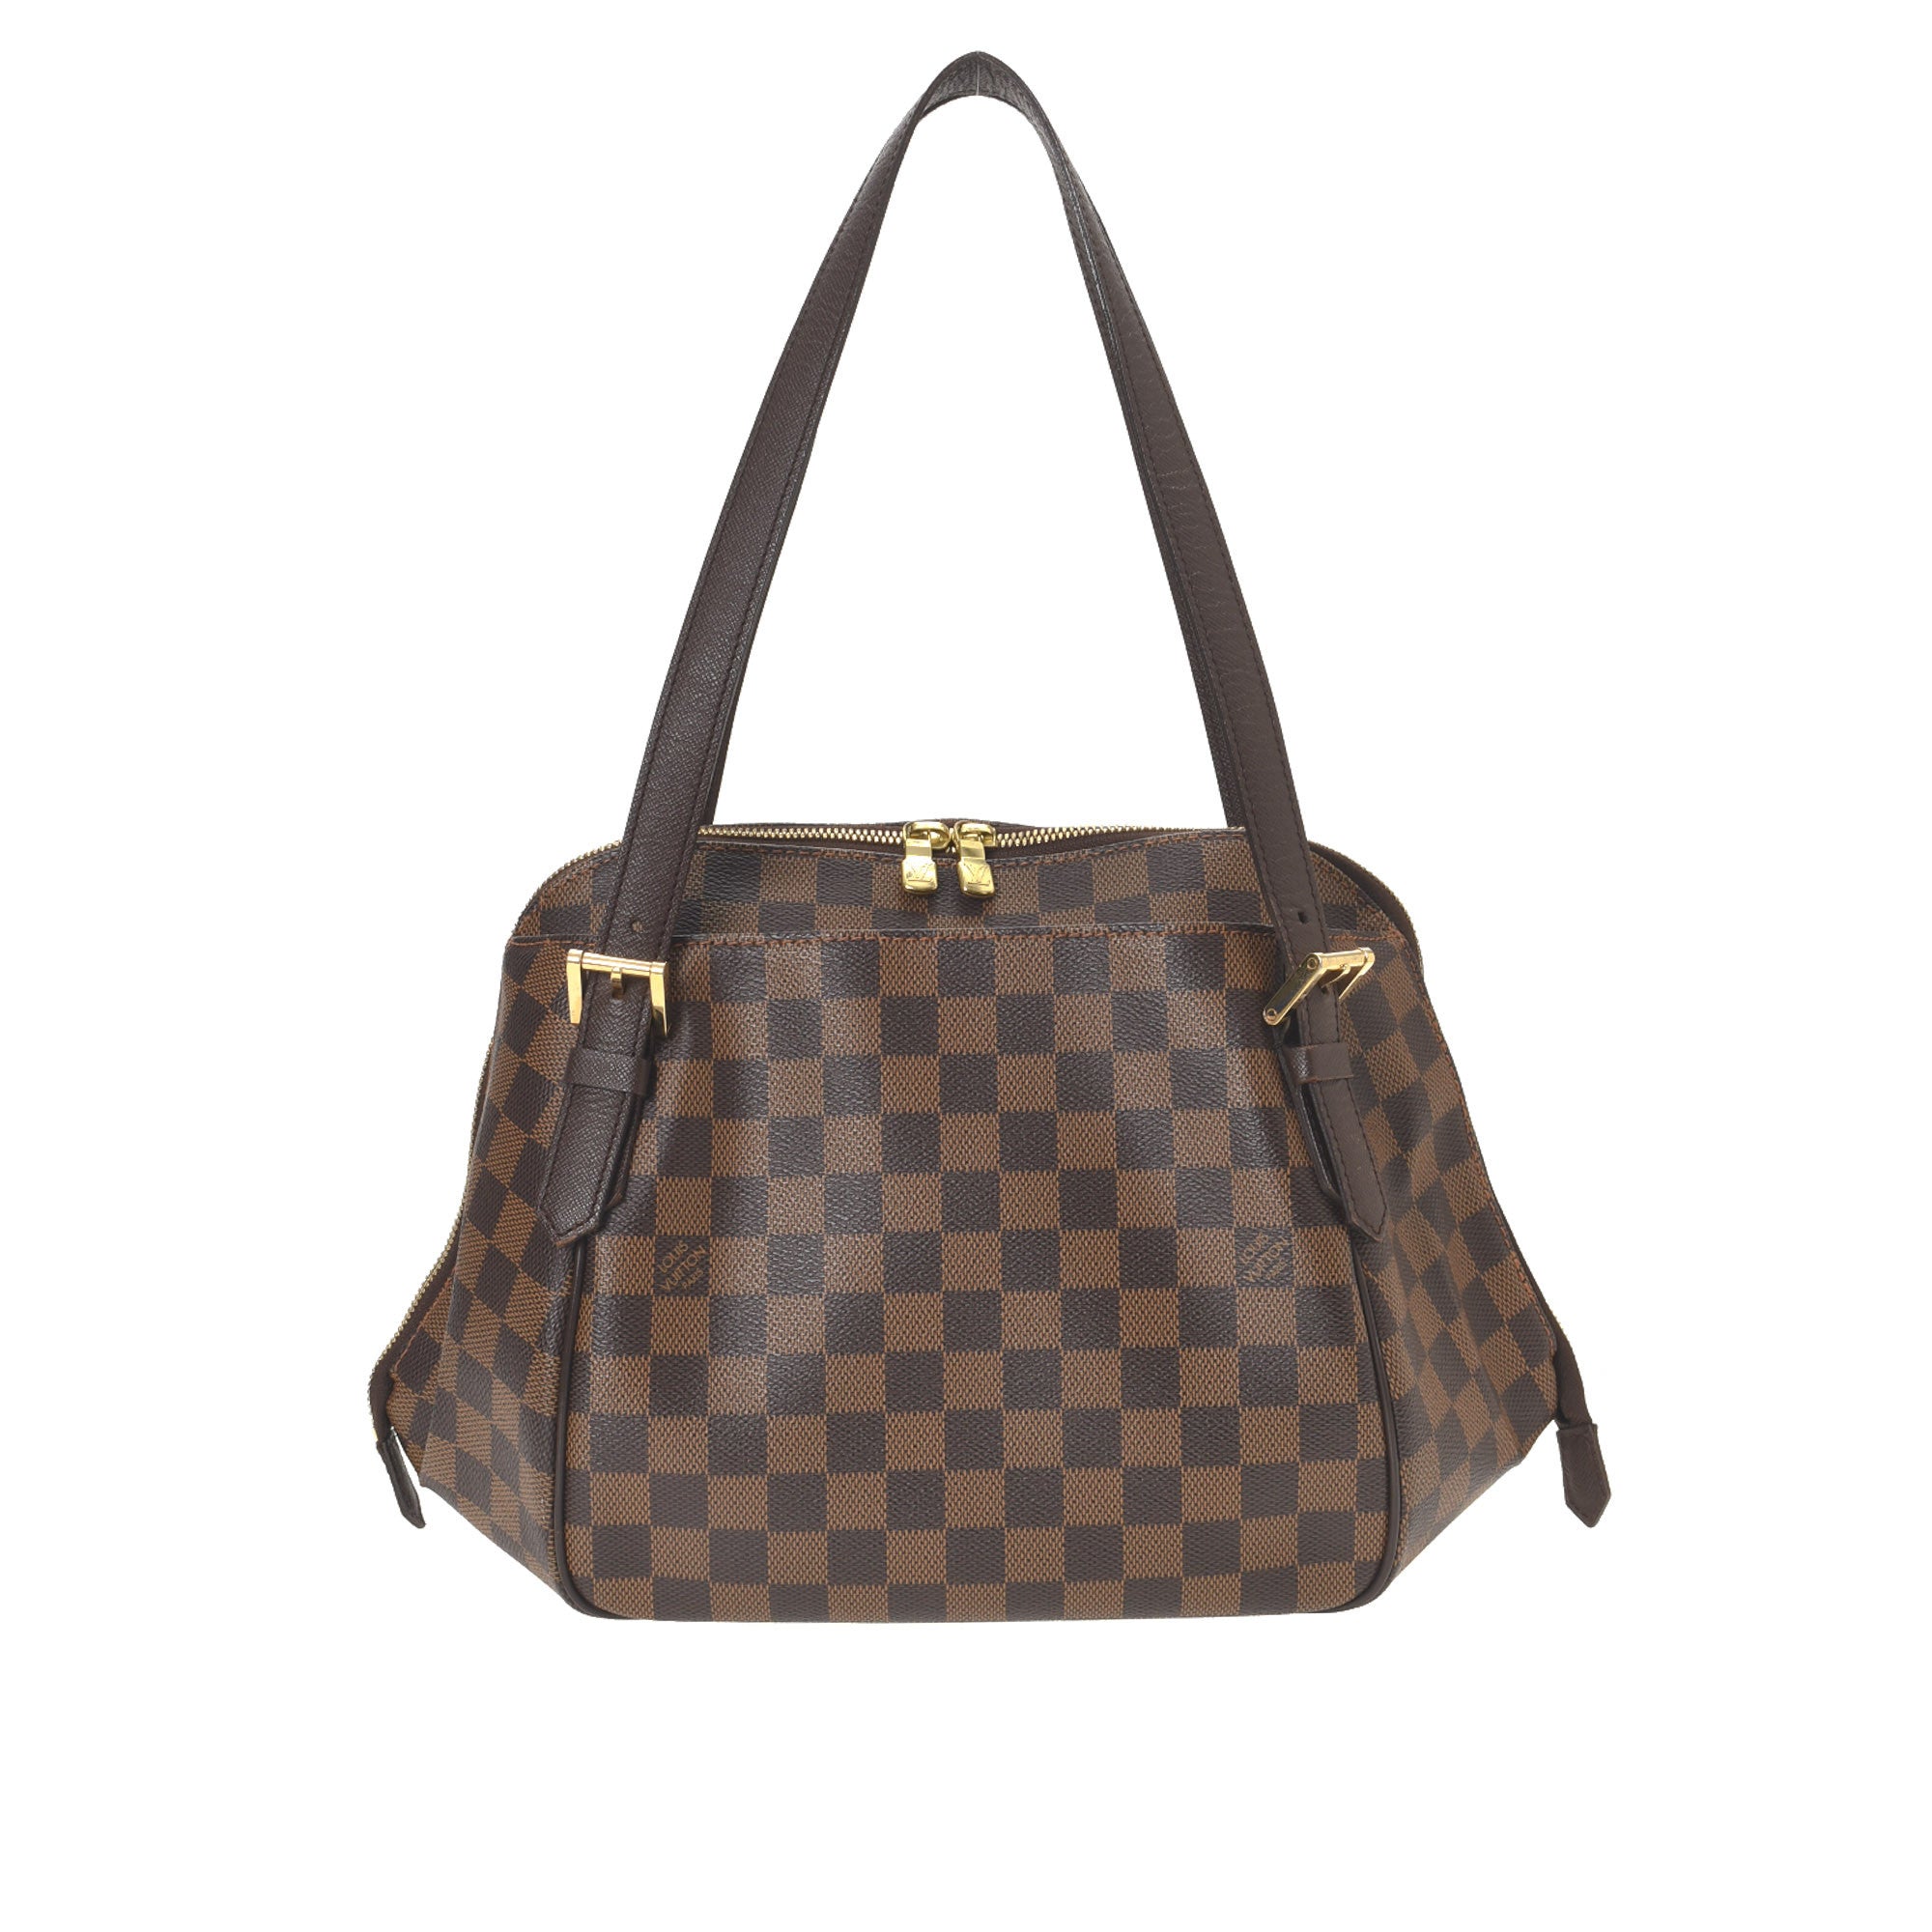 Louis Vuitton - New Arrivals, Authentic Used Bags & Handbags